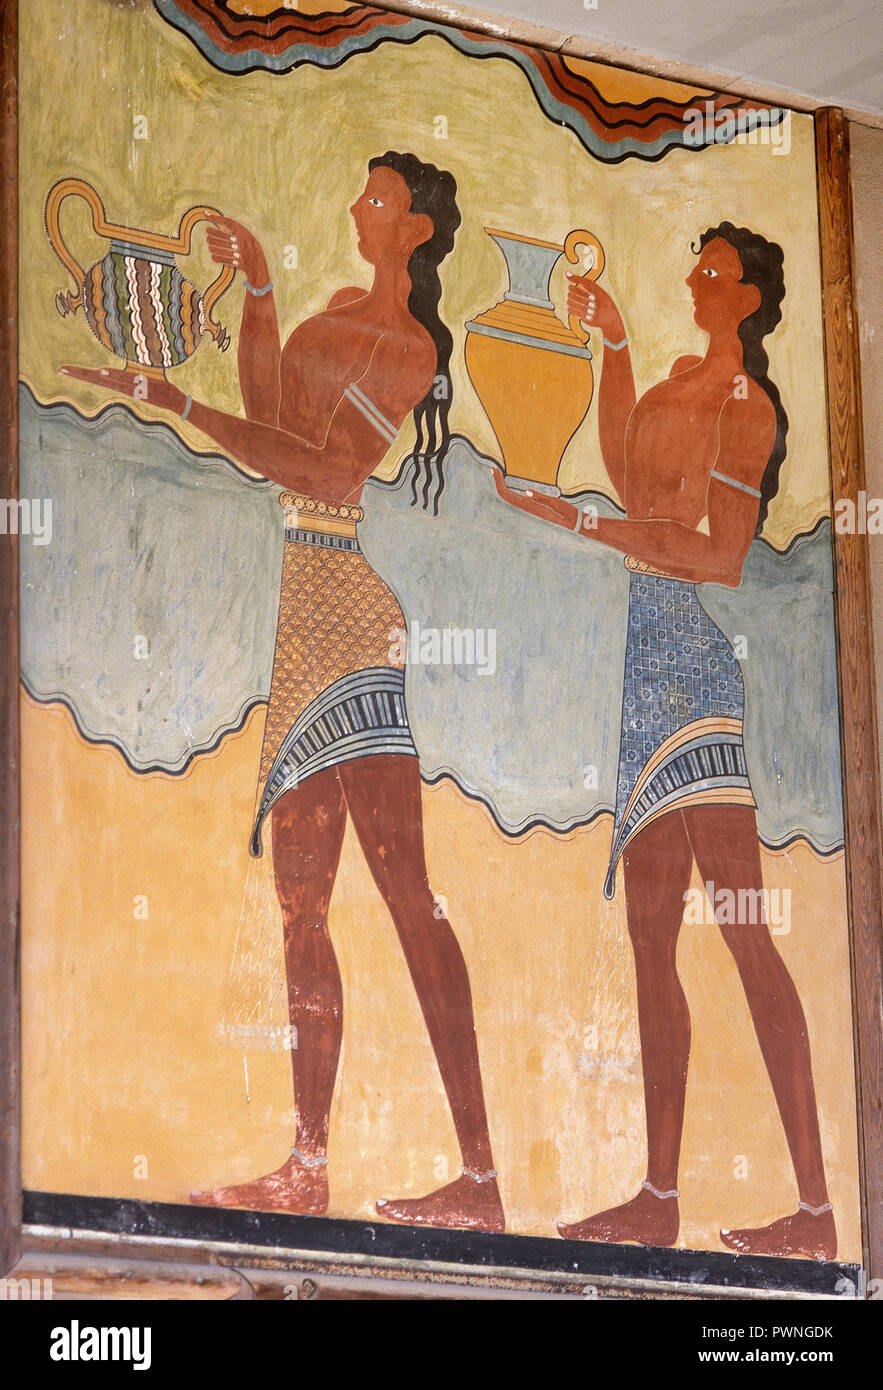 Palace of Knossos (1700-1450 BC). Reproduction of a fresco depicting two young men transporting cups. South Propylaeum. Crete, Greece. Stock Photo